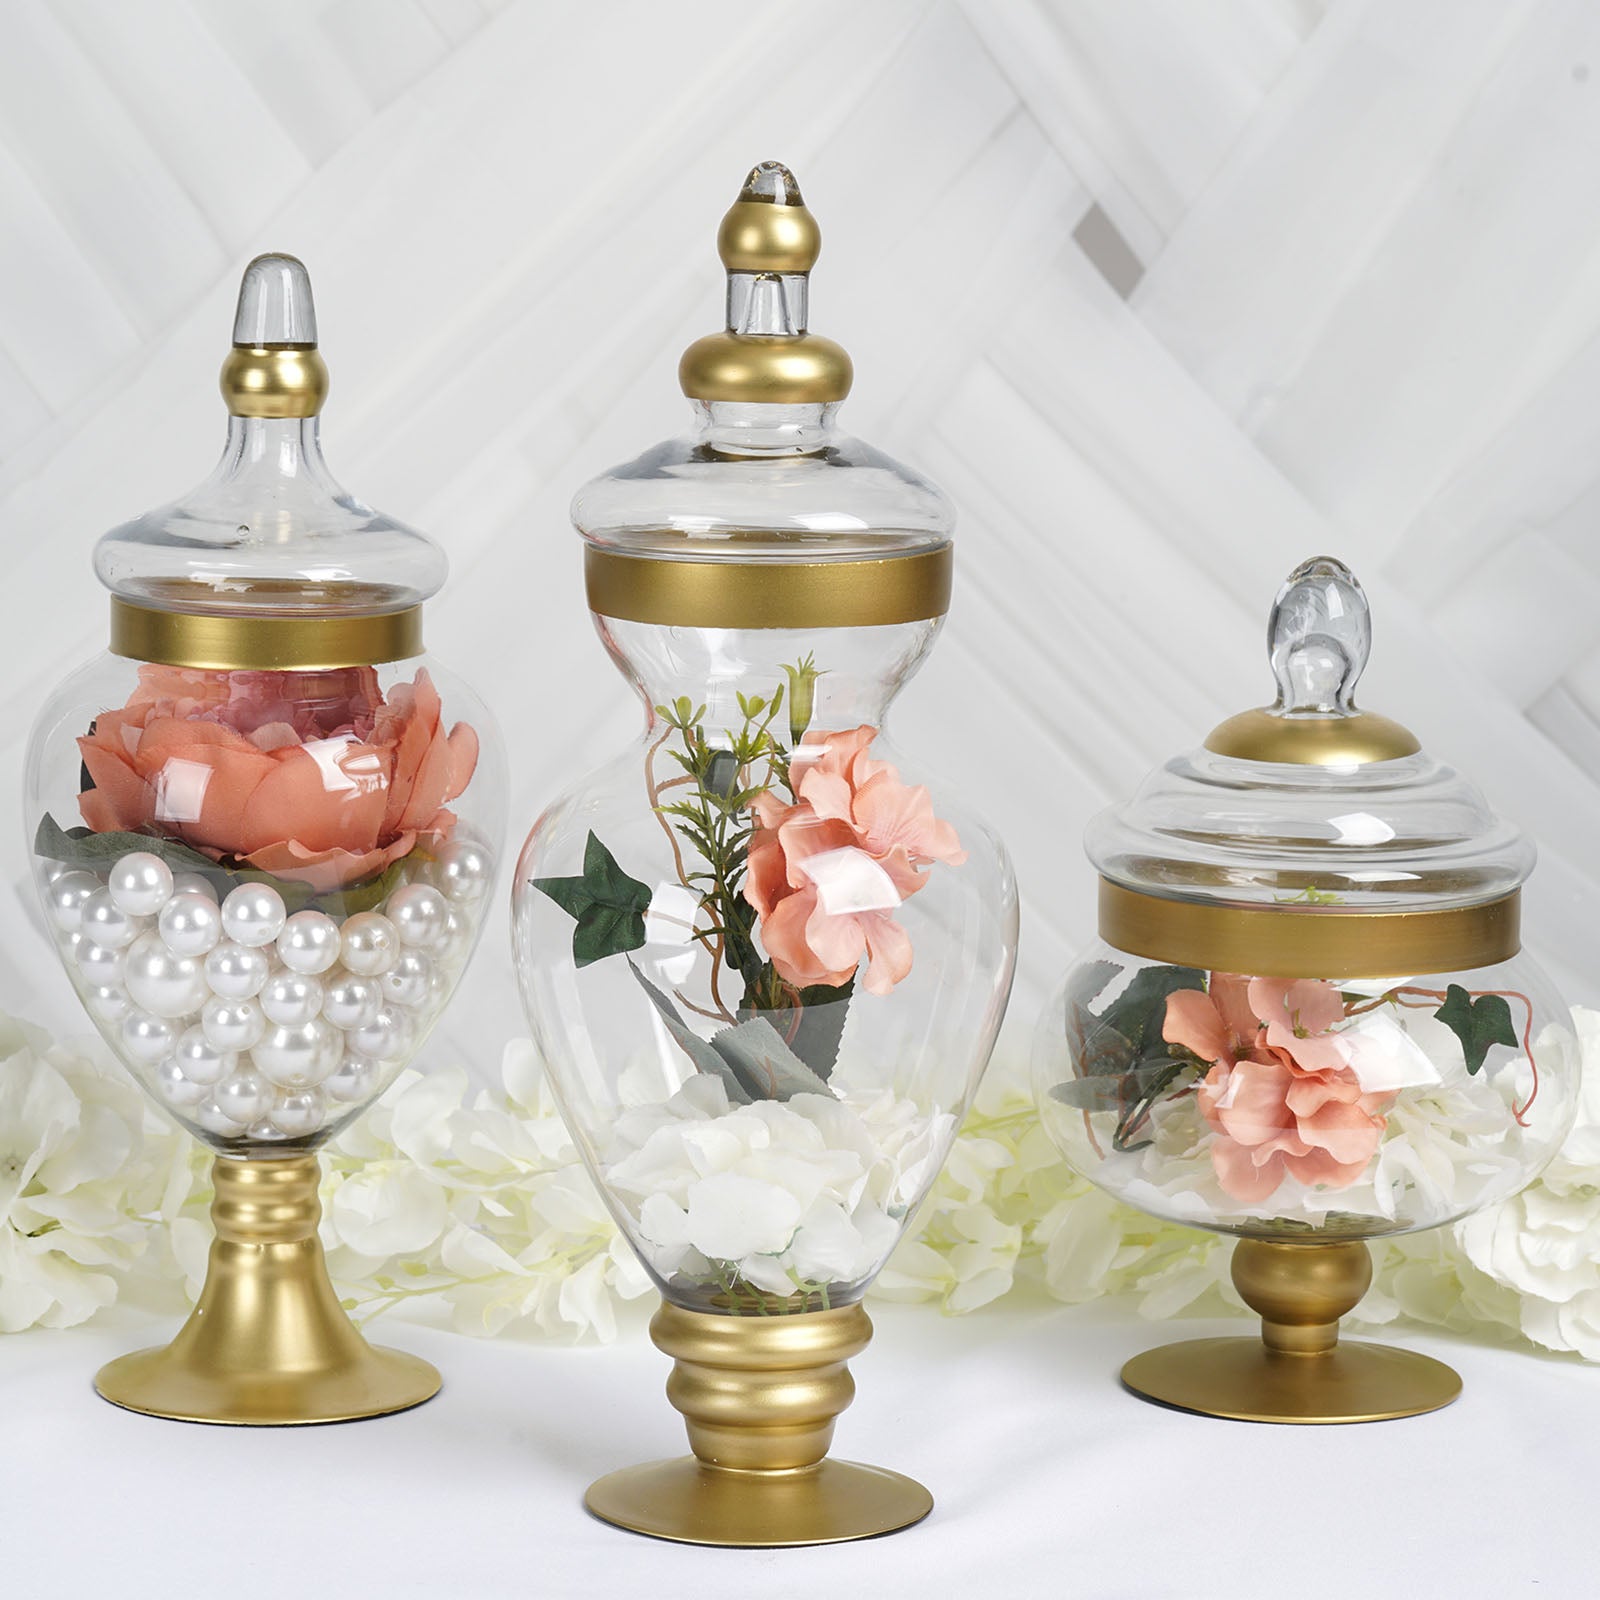 Efavormart Set of 3 Gold Trimmed Glass Apothecary Candy Jars with Lids -10 inch/14 inch/16 inch